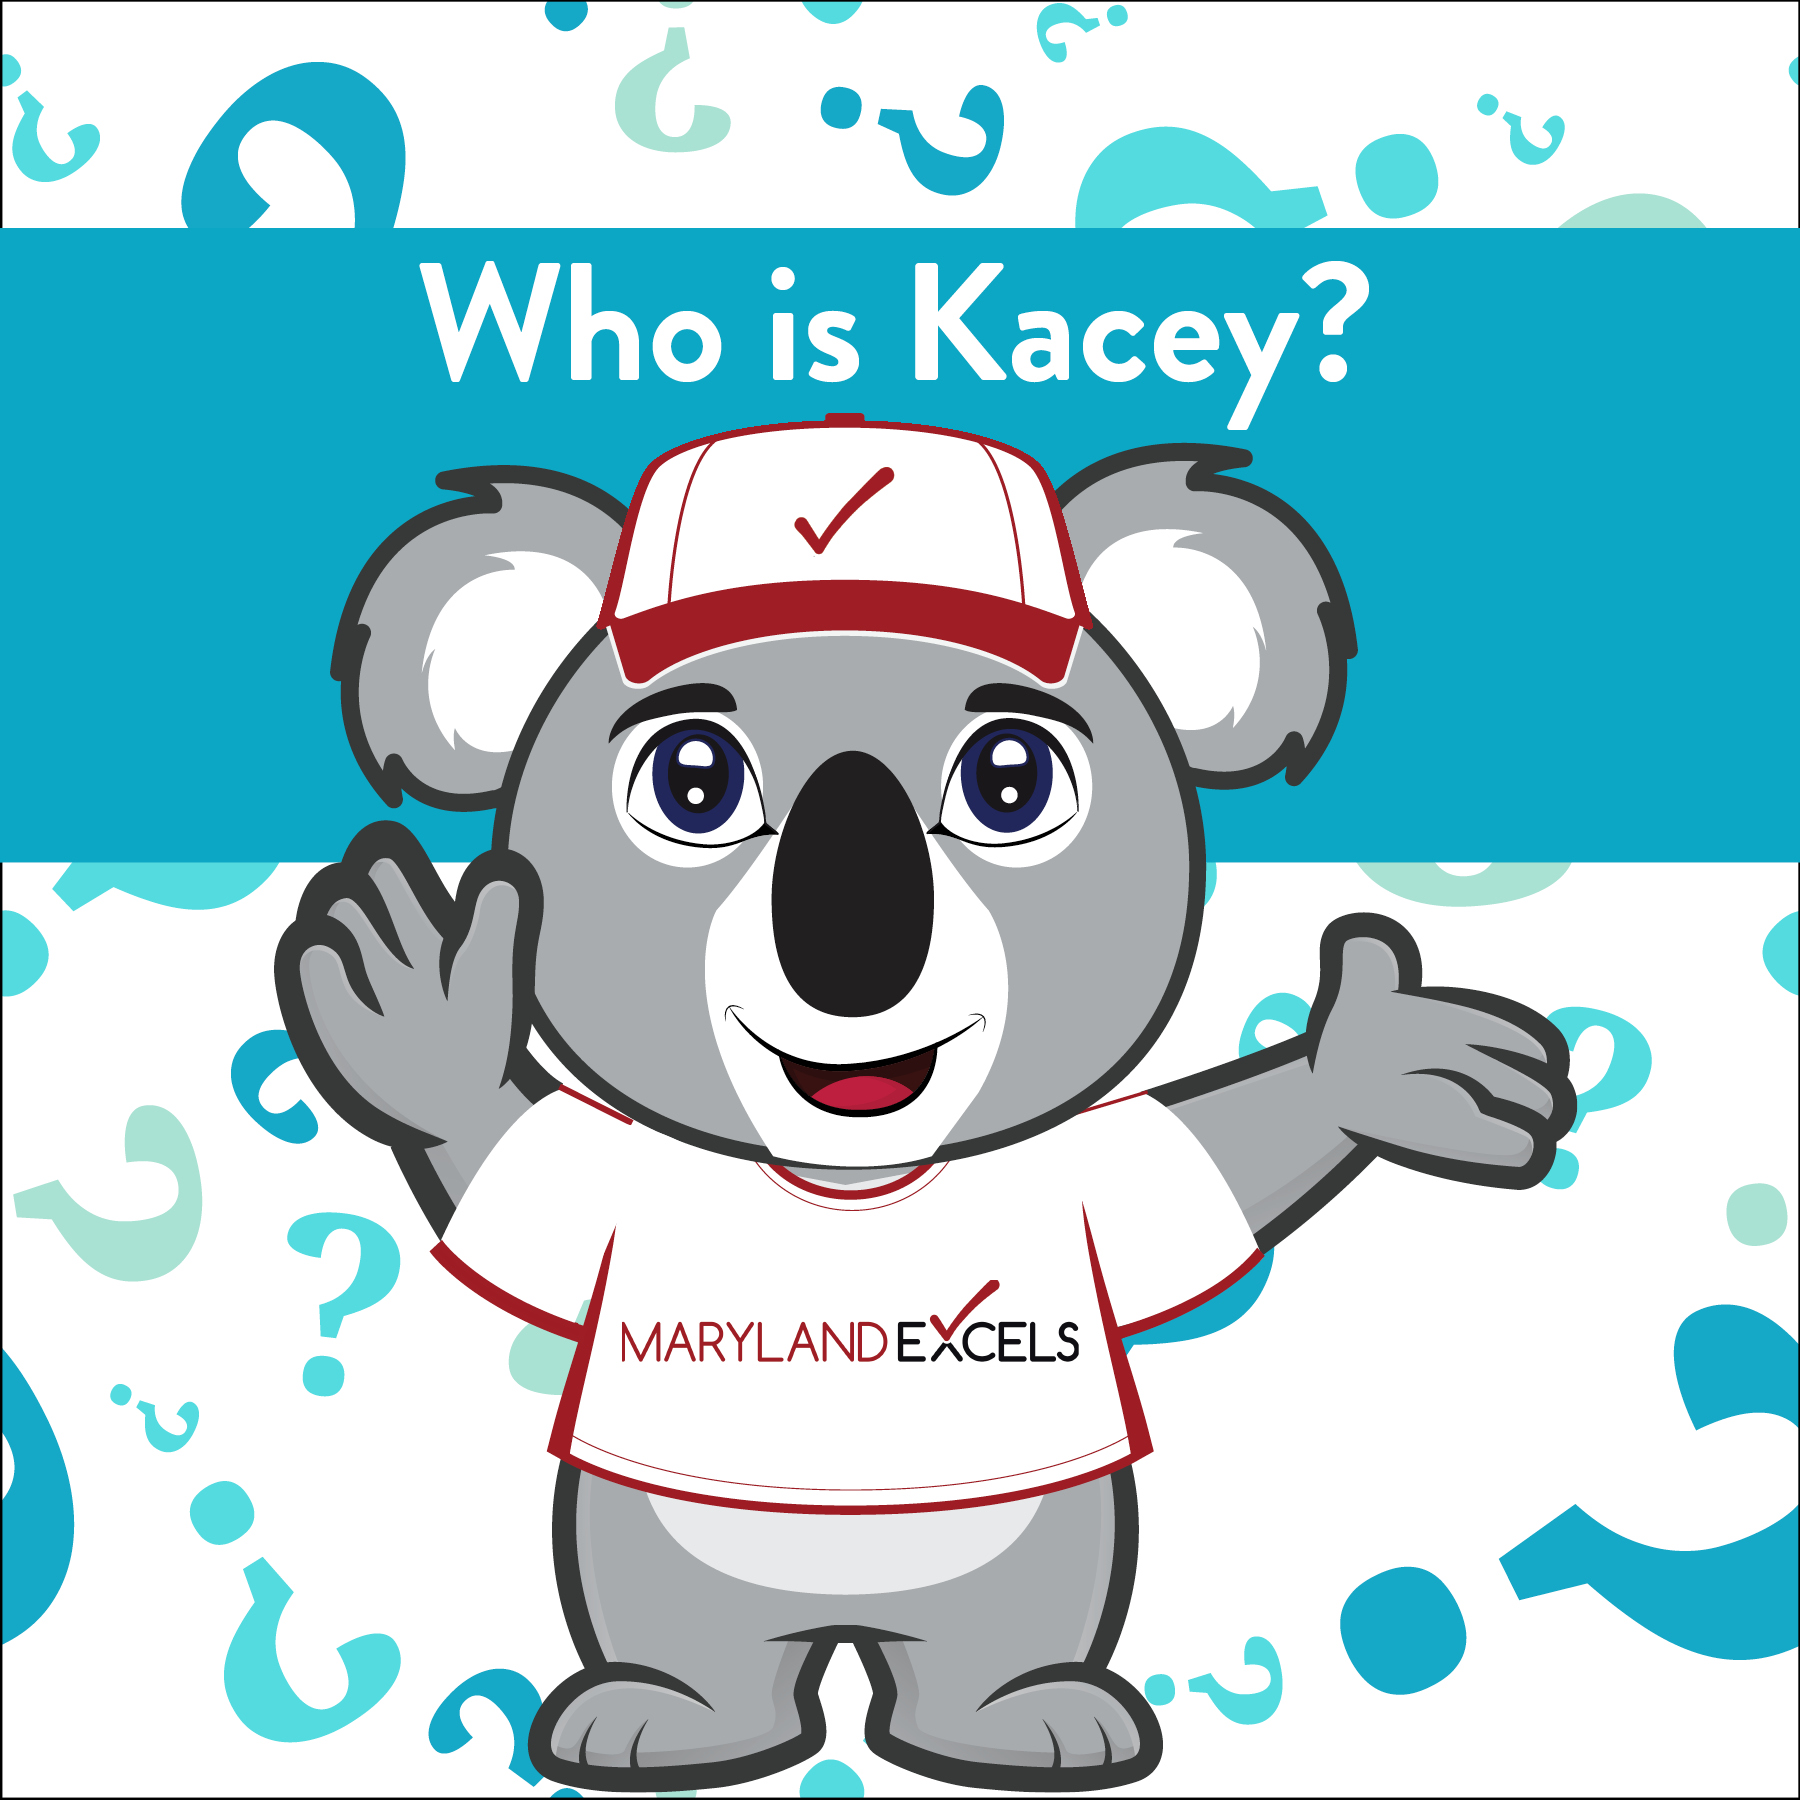 Who is Kacey Maryland Excels